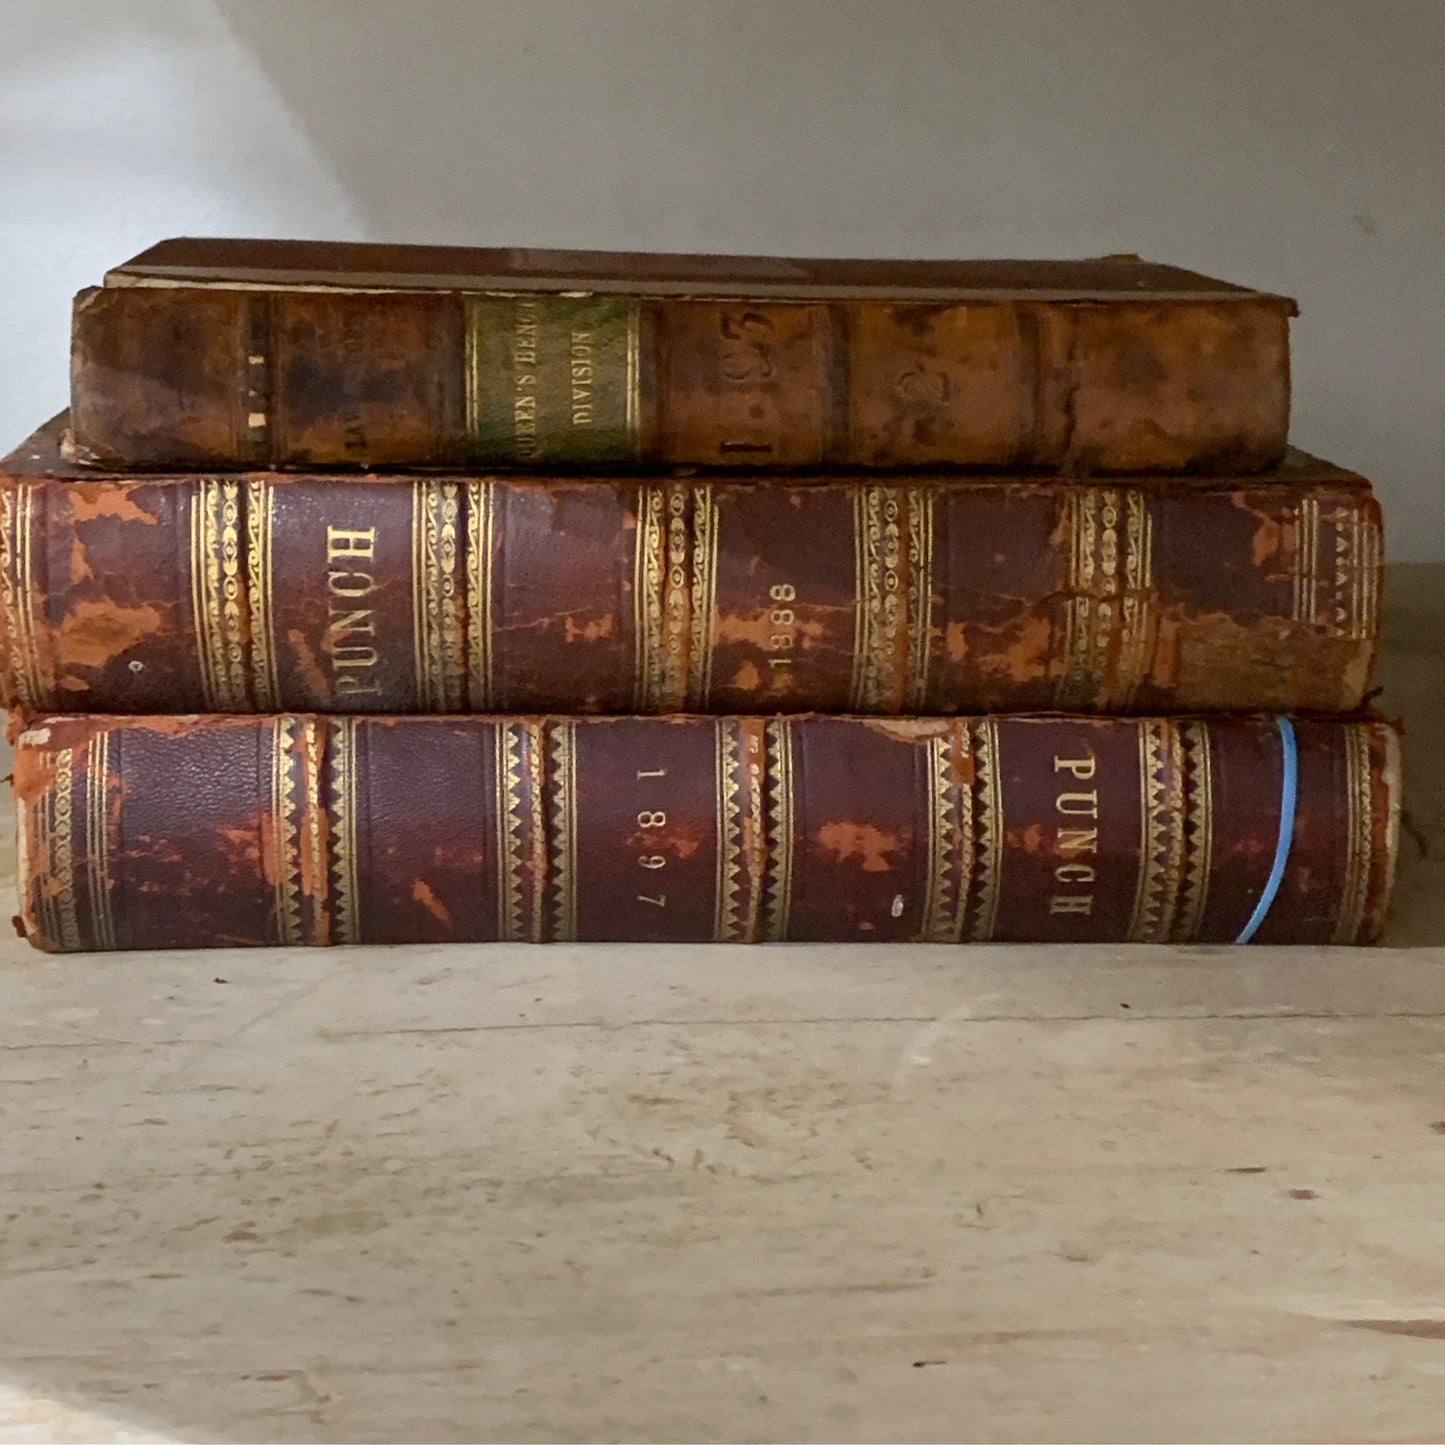 Punch Books - The White Barn Antiques